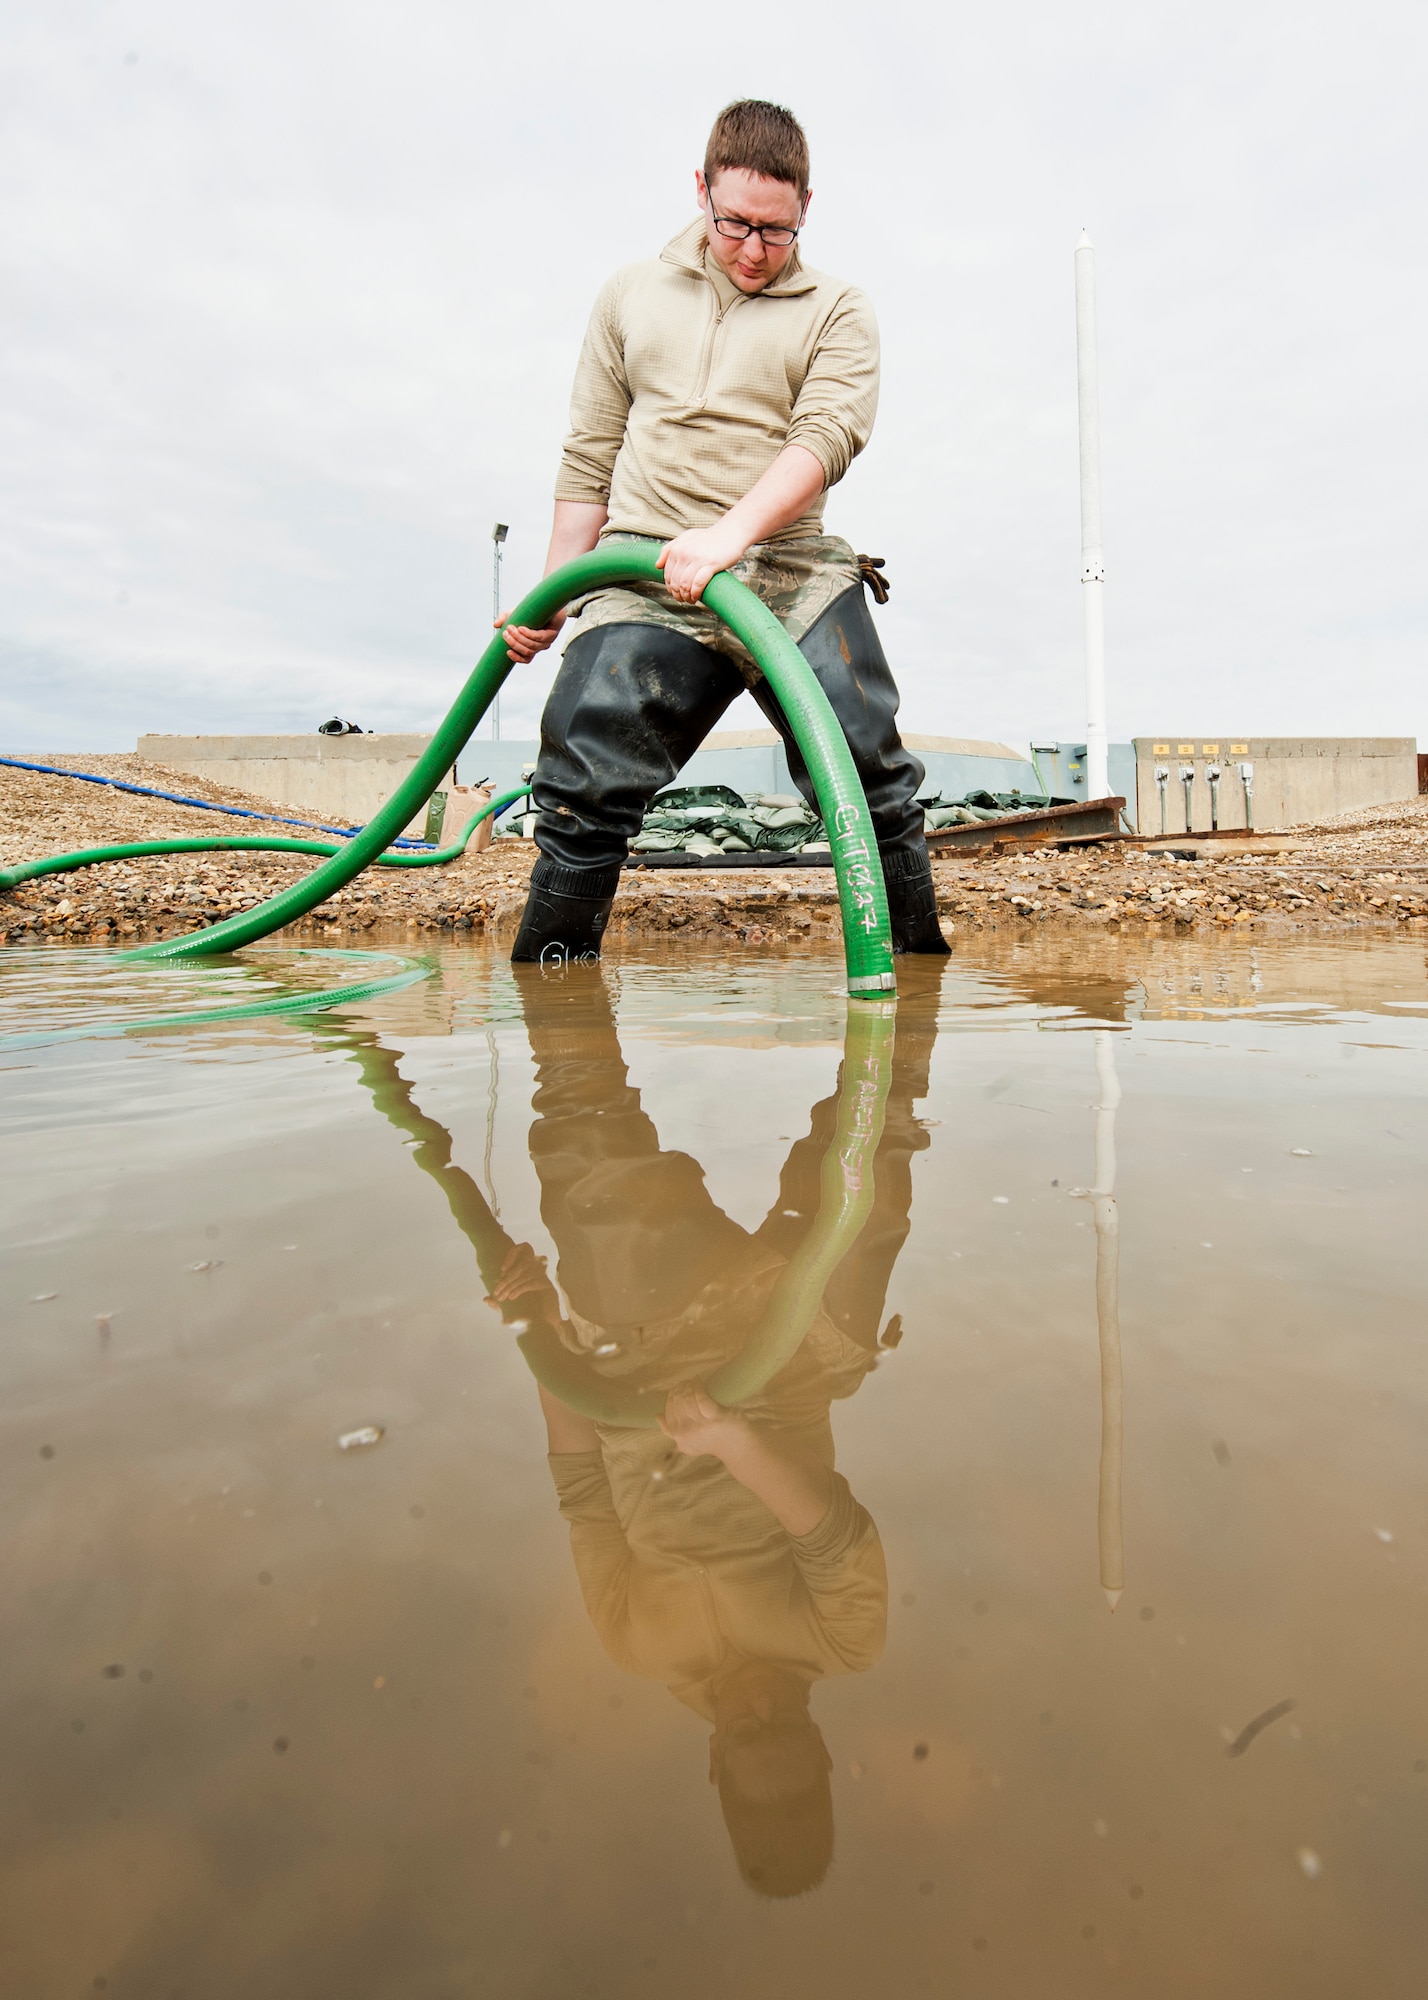 Senior Airman Matthew Singer, 91st Missile Maintenance Squadron electromechanical team technician, finishes draining flood-water from a launch facility near Bowbells, N.D., March 29, 2017. Singer used a water-pump and hose to drain and relocate water to a safe level. (U.S Air Force photo/Senior Airman J.T. Armstrong)